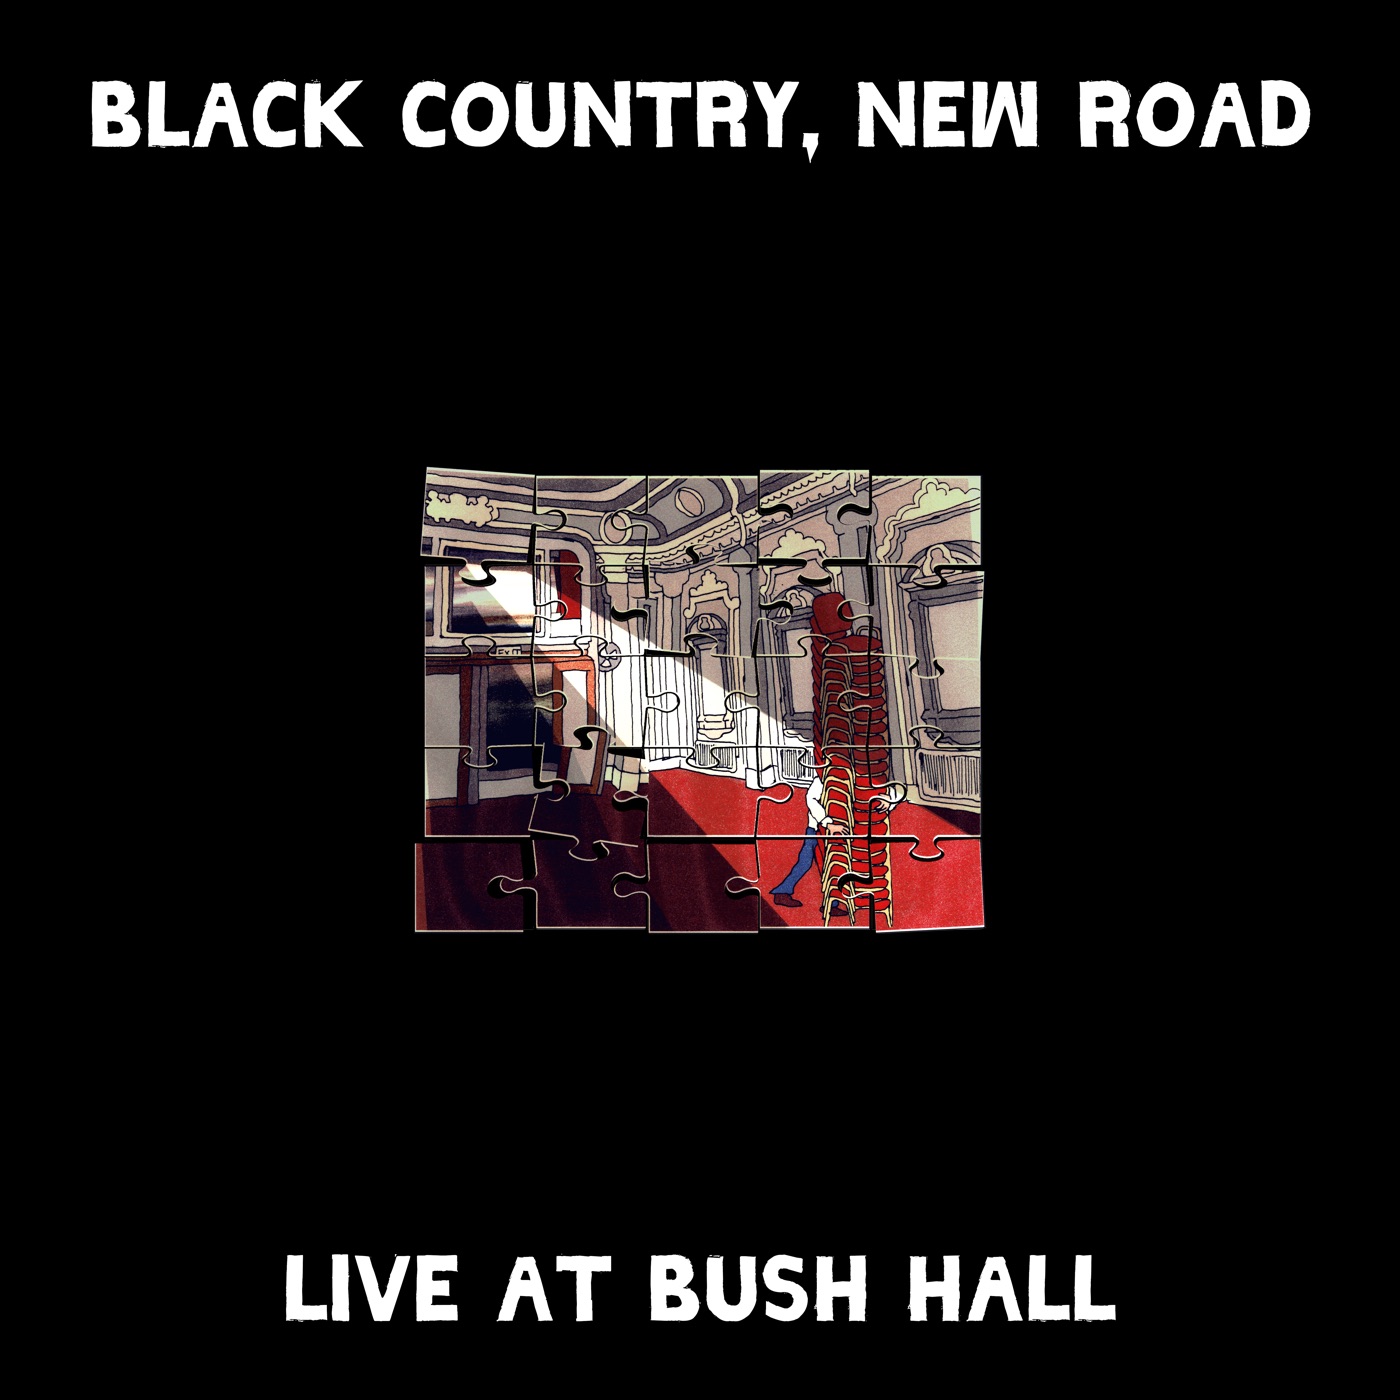 Live at Bush Hall by Black Country, New Road